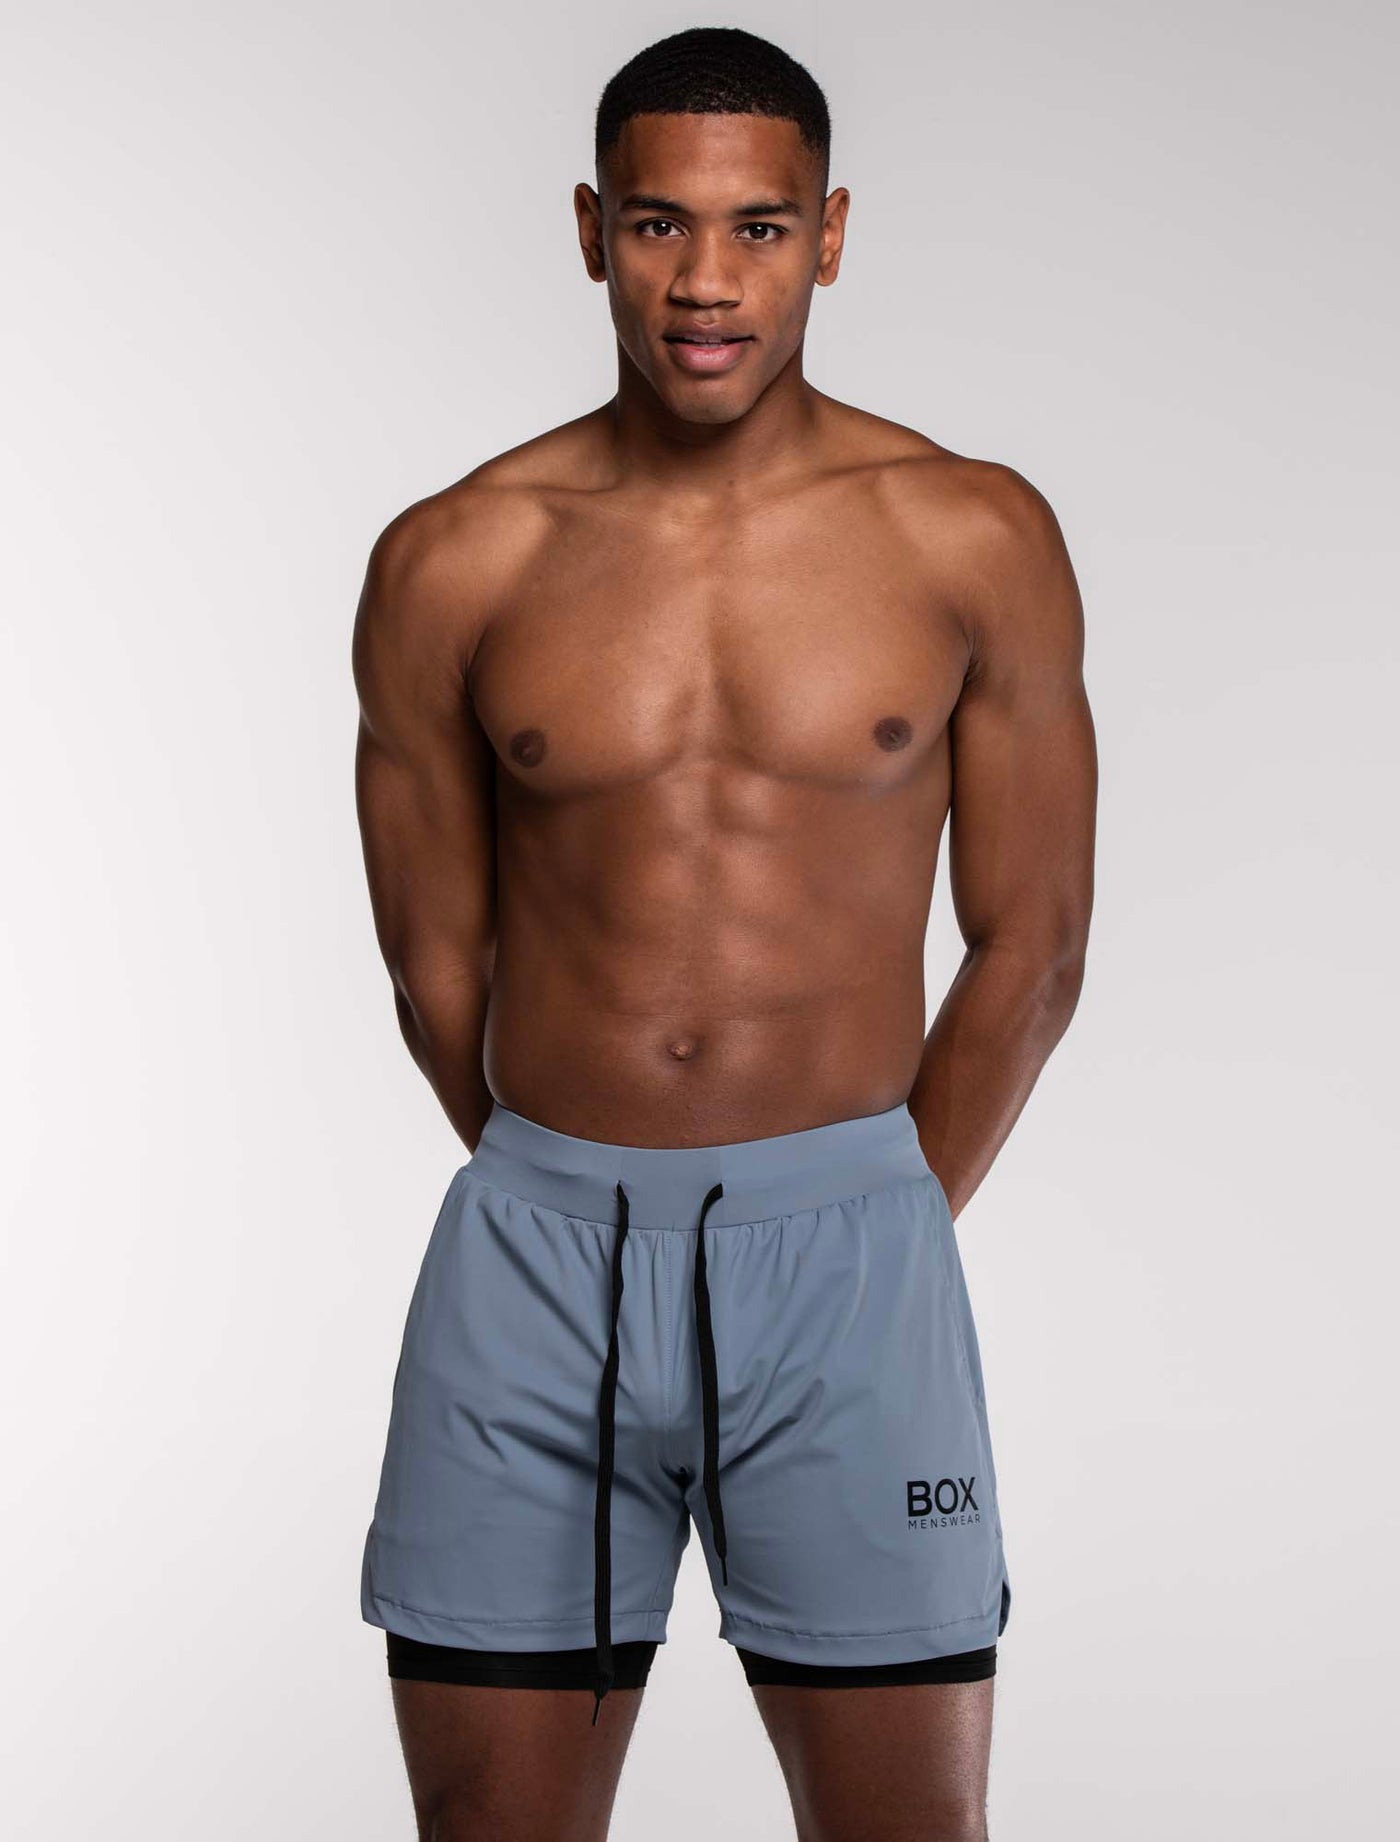 Mens Double Layer Sports Shorts - Charcoal